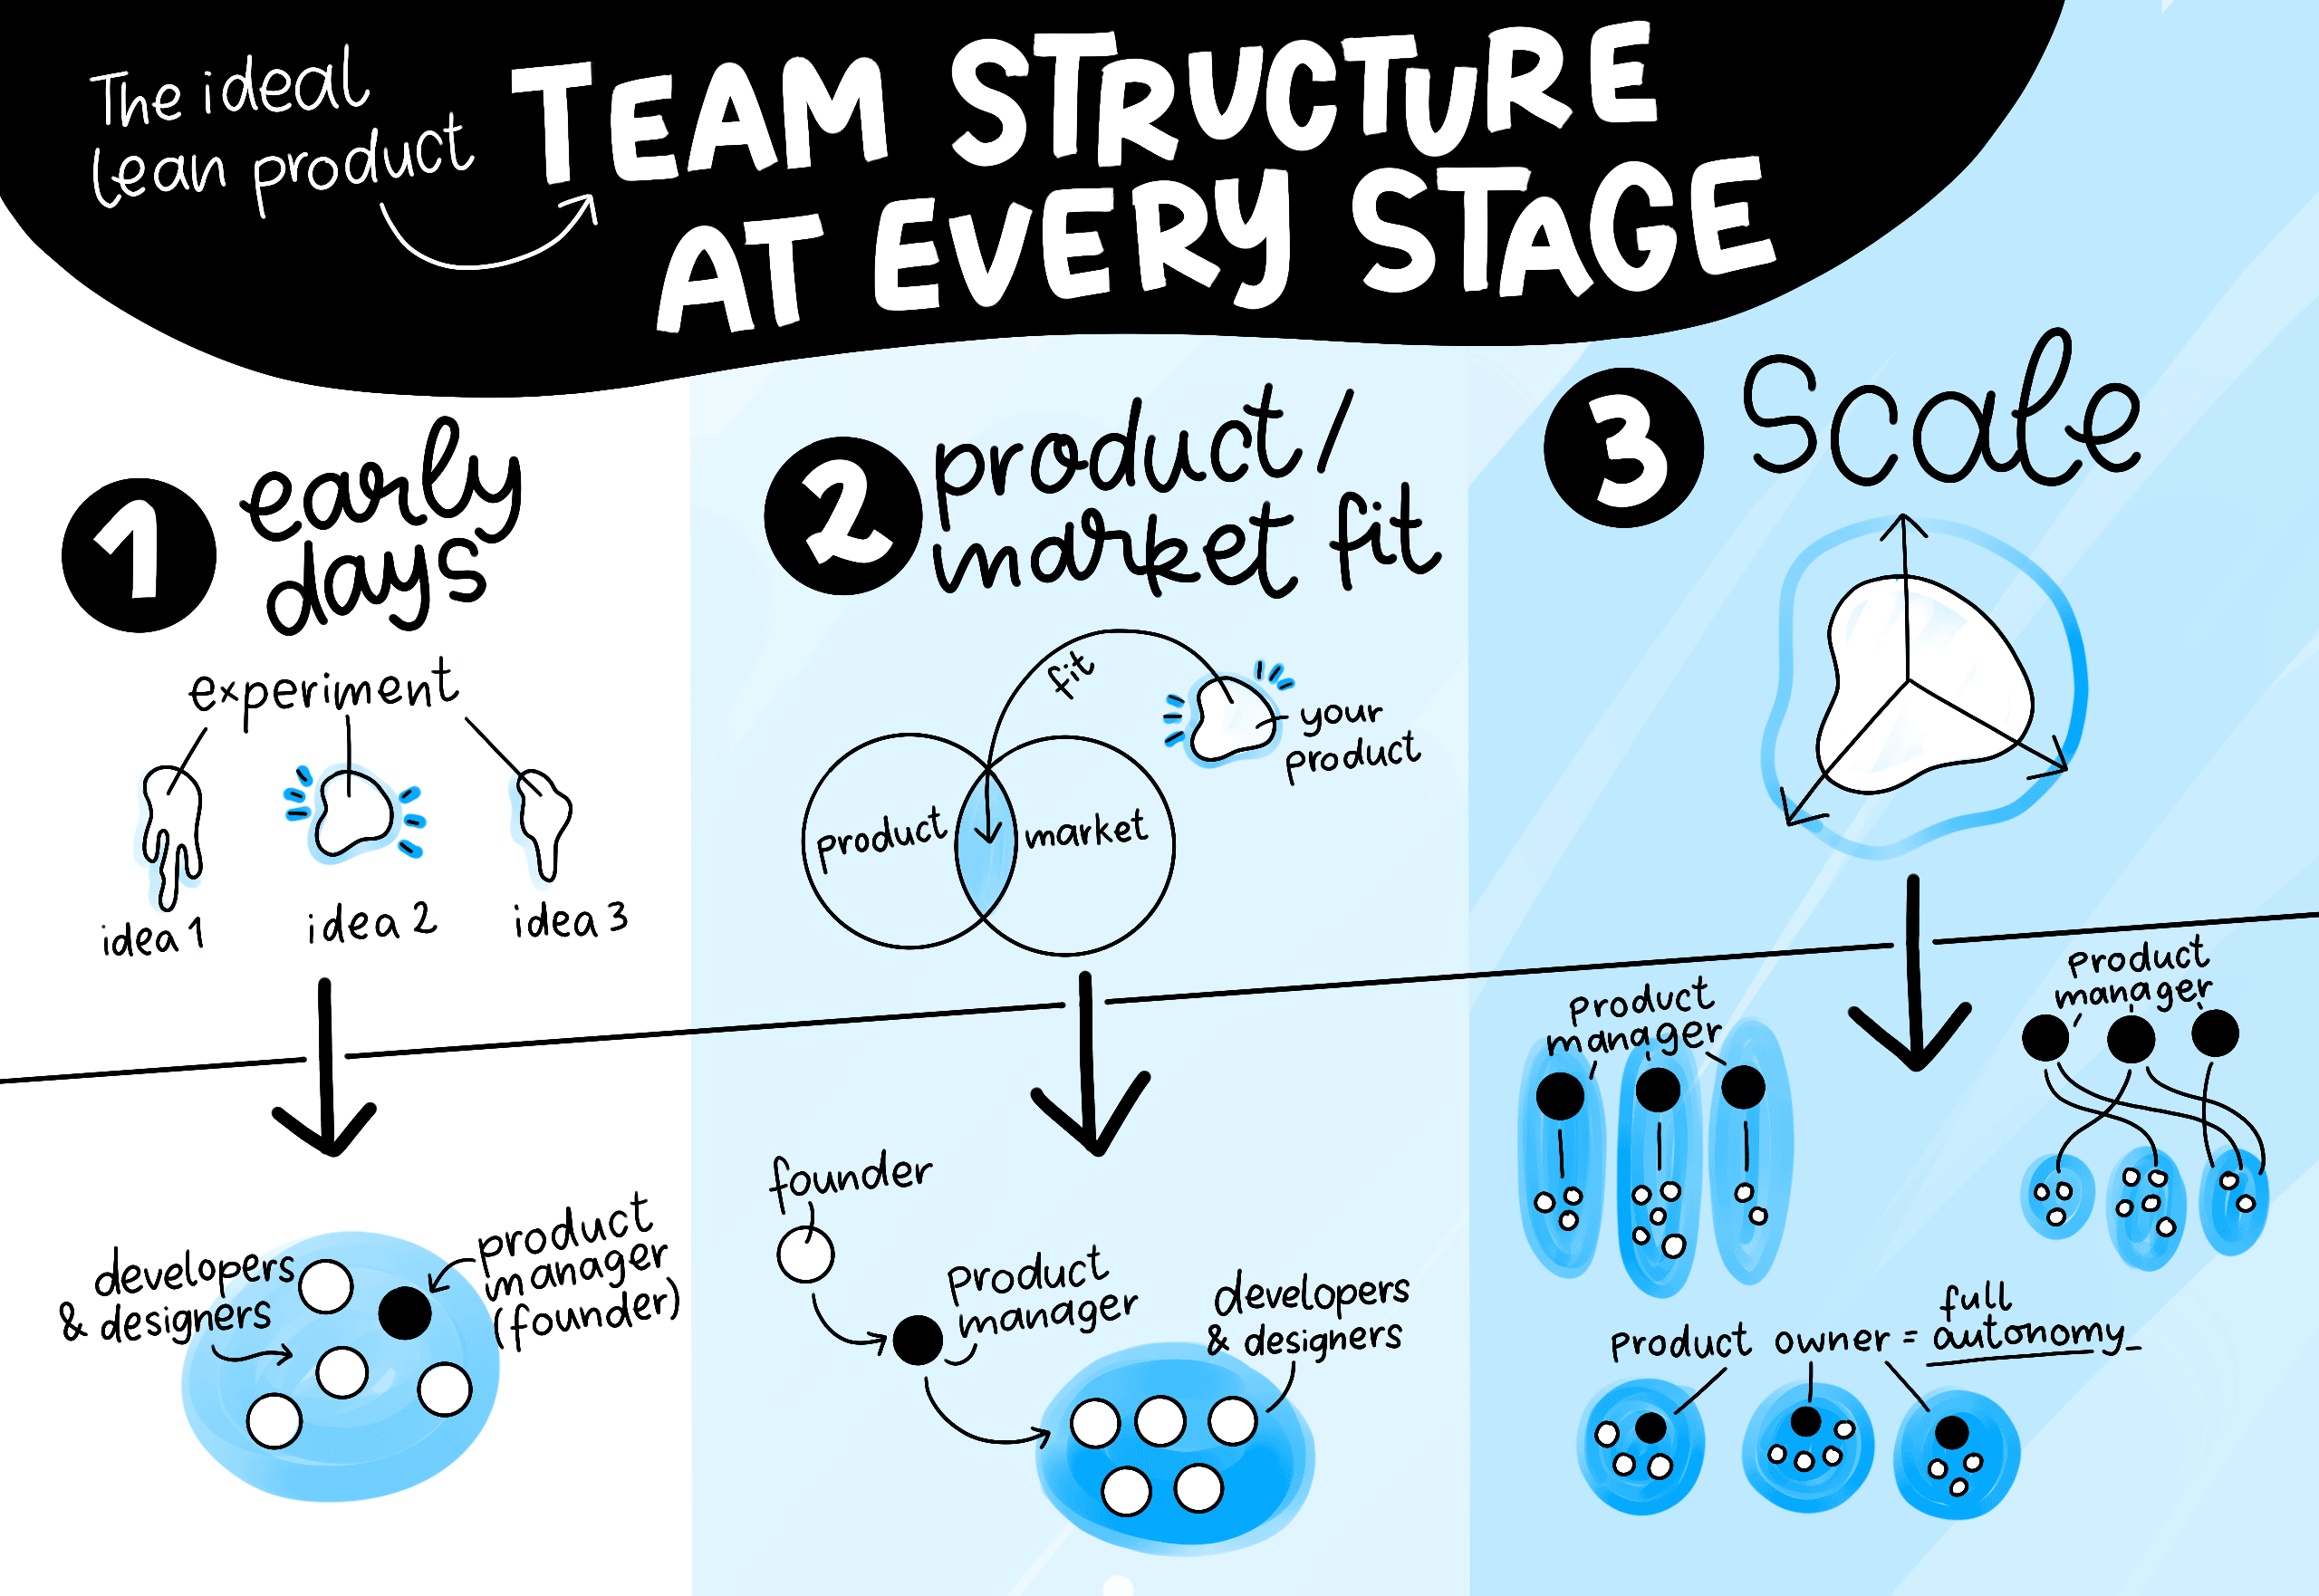 The ideal lean product team structure at every stage